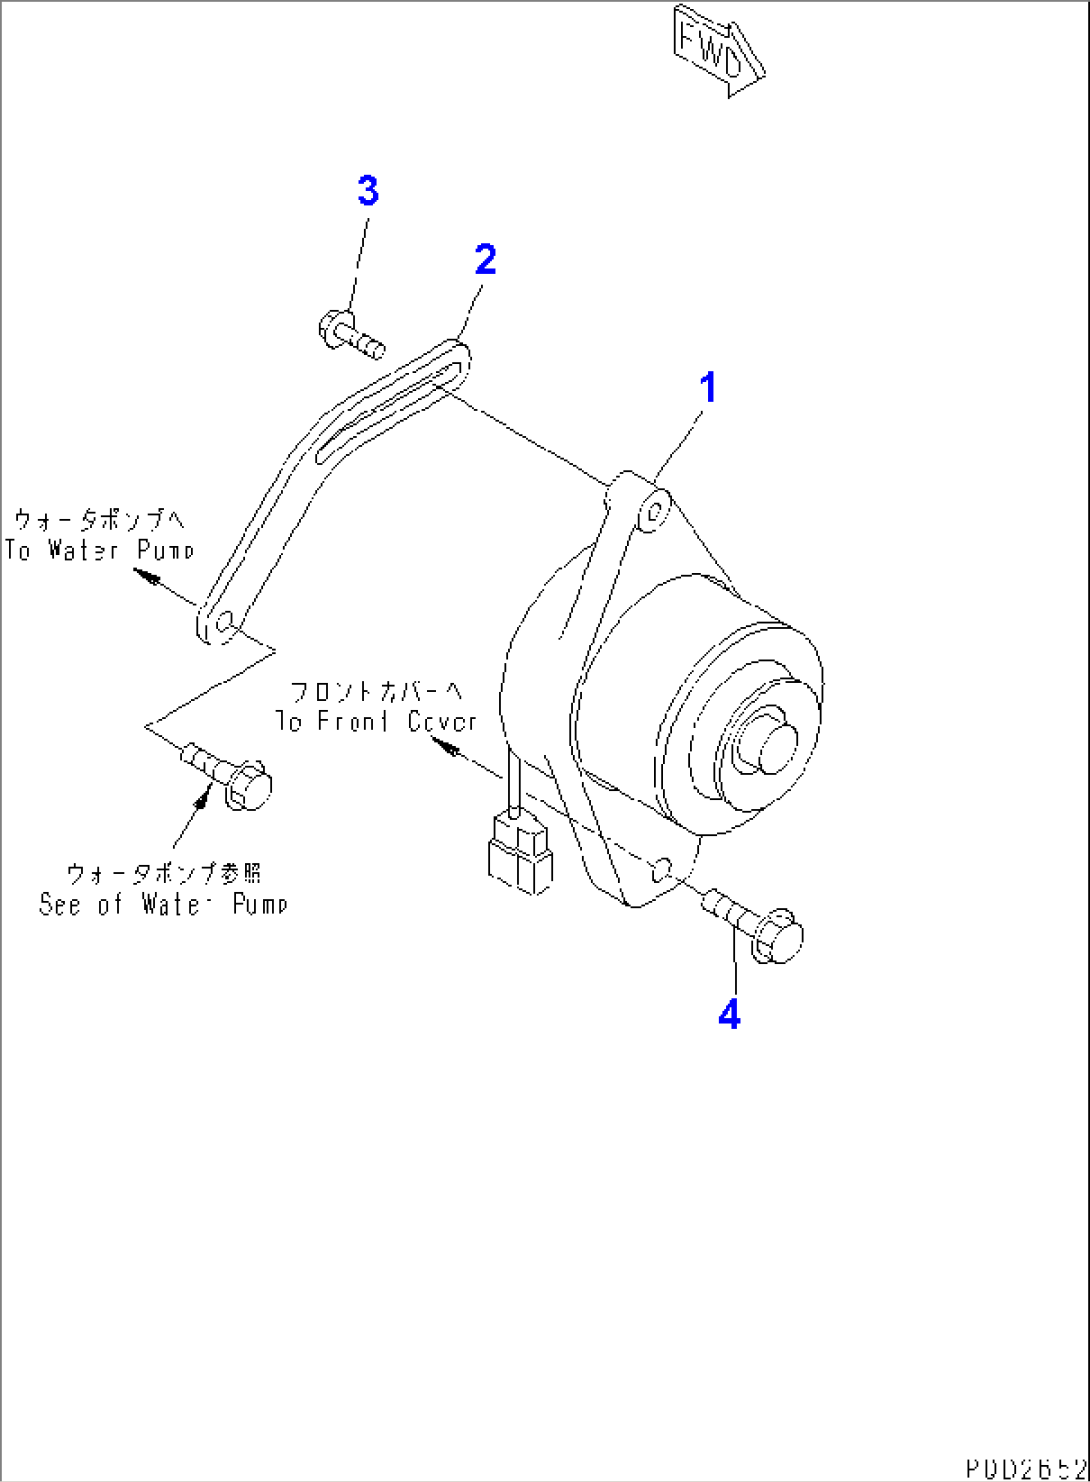 ALTERNATOR AND MOUNTING (20A)